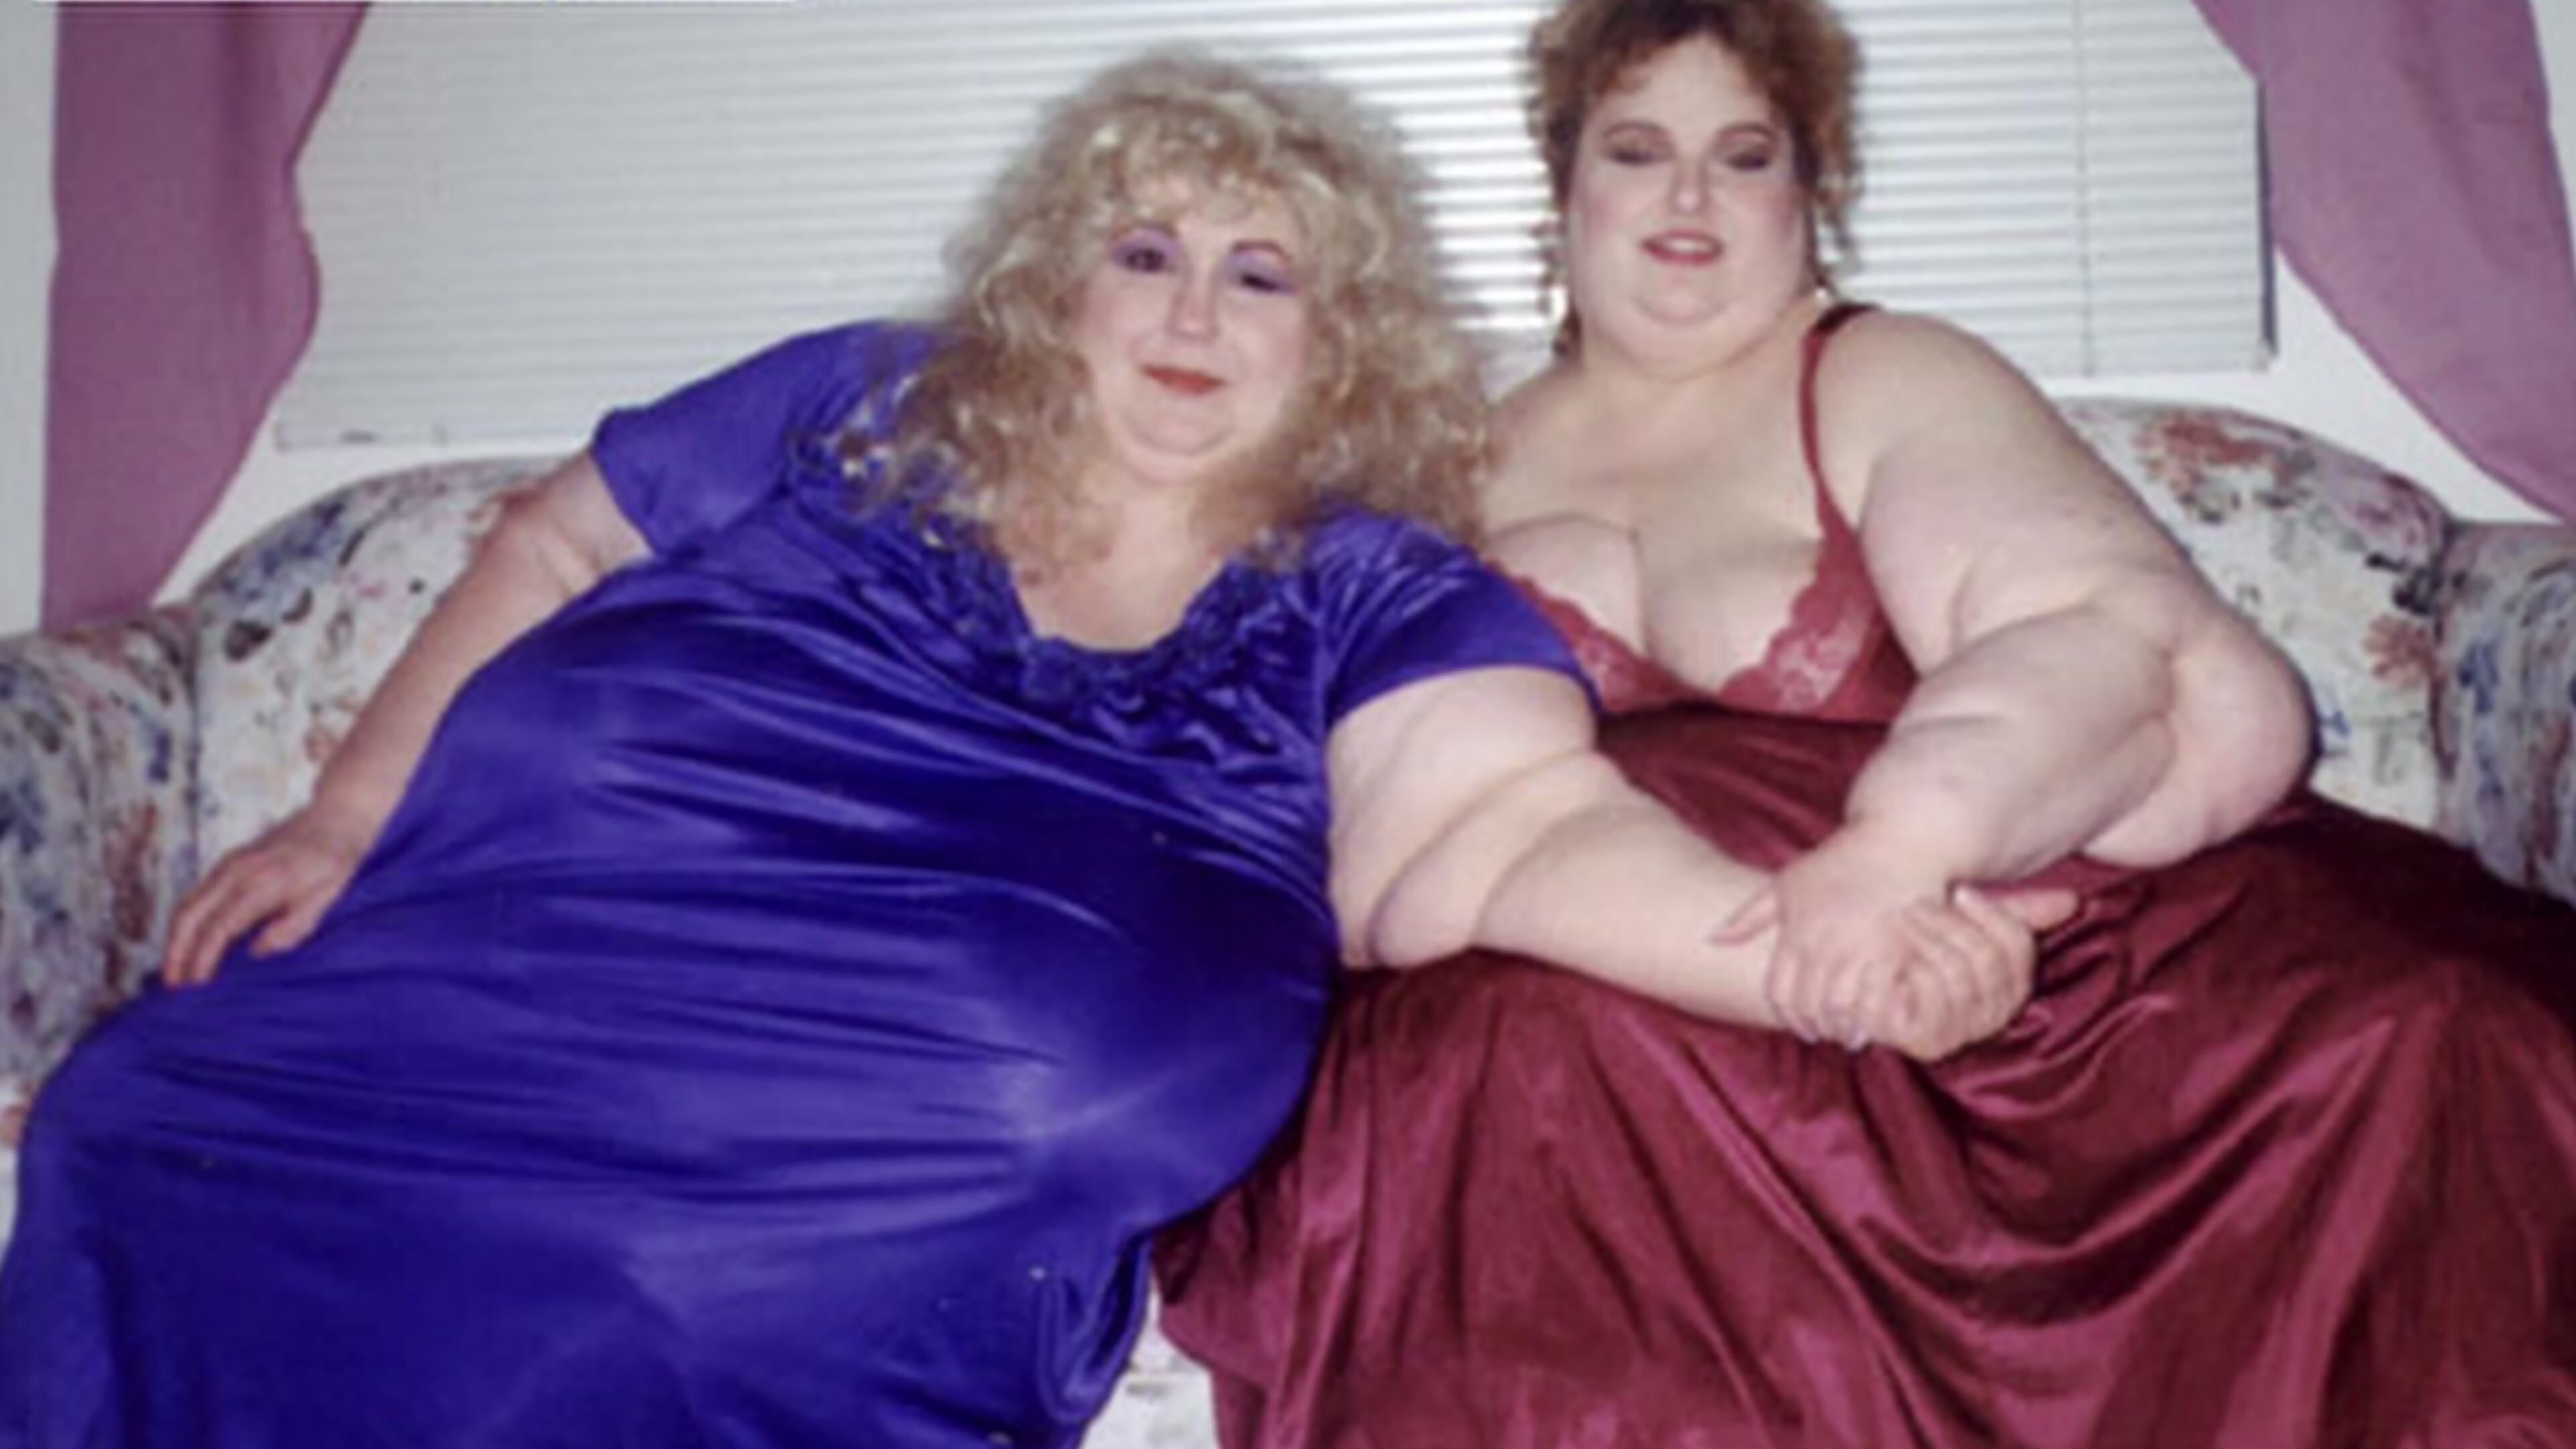 Two Massive Women on the Couch